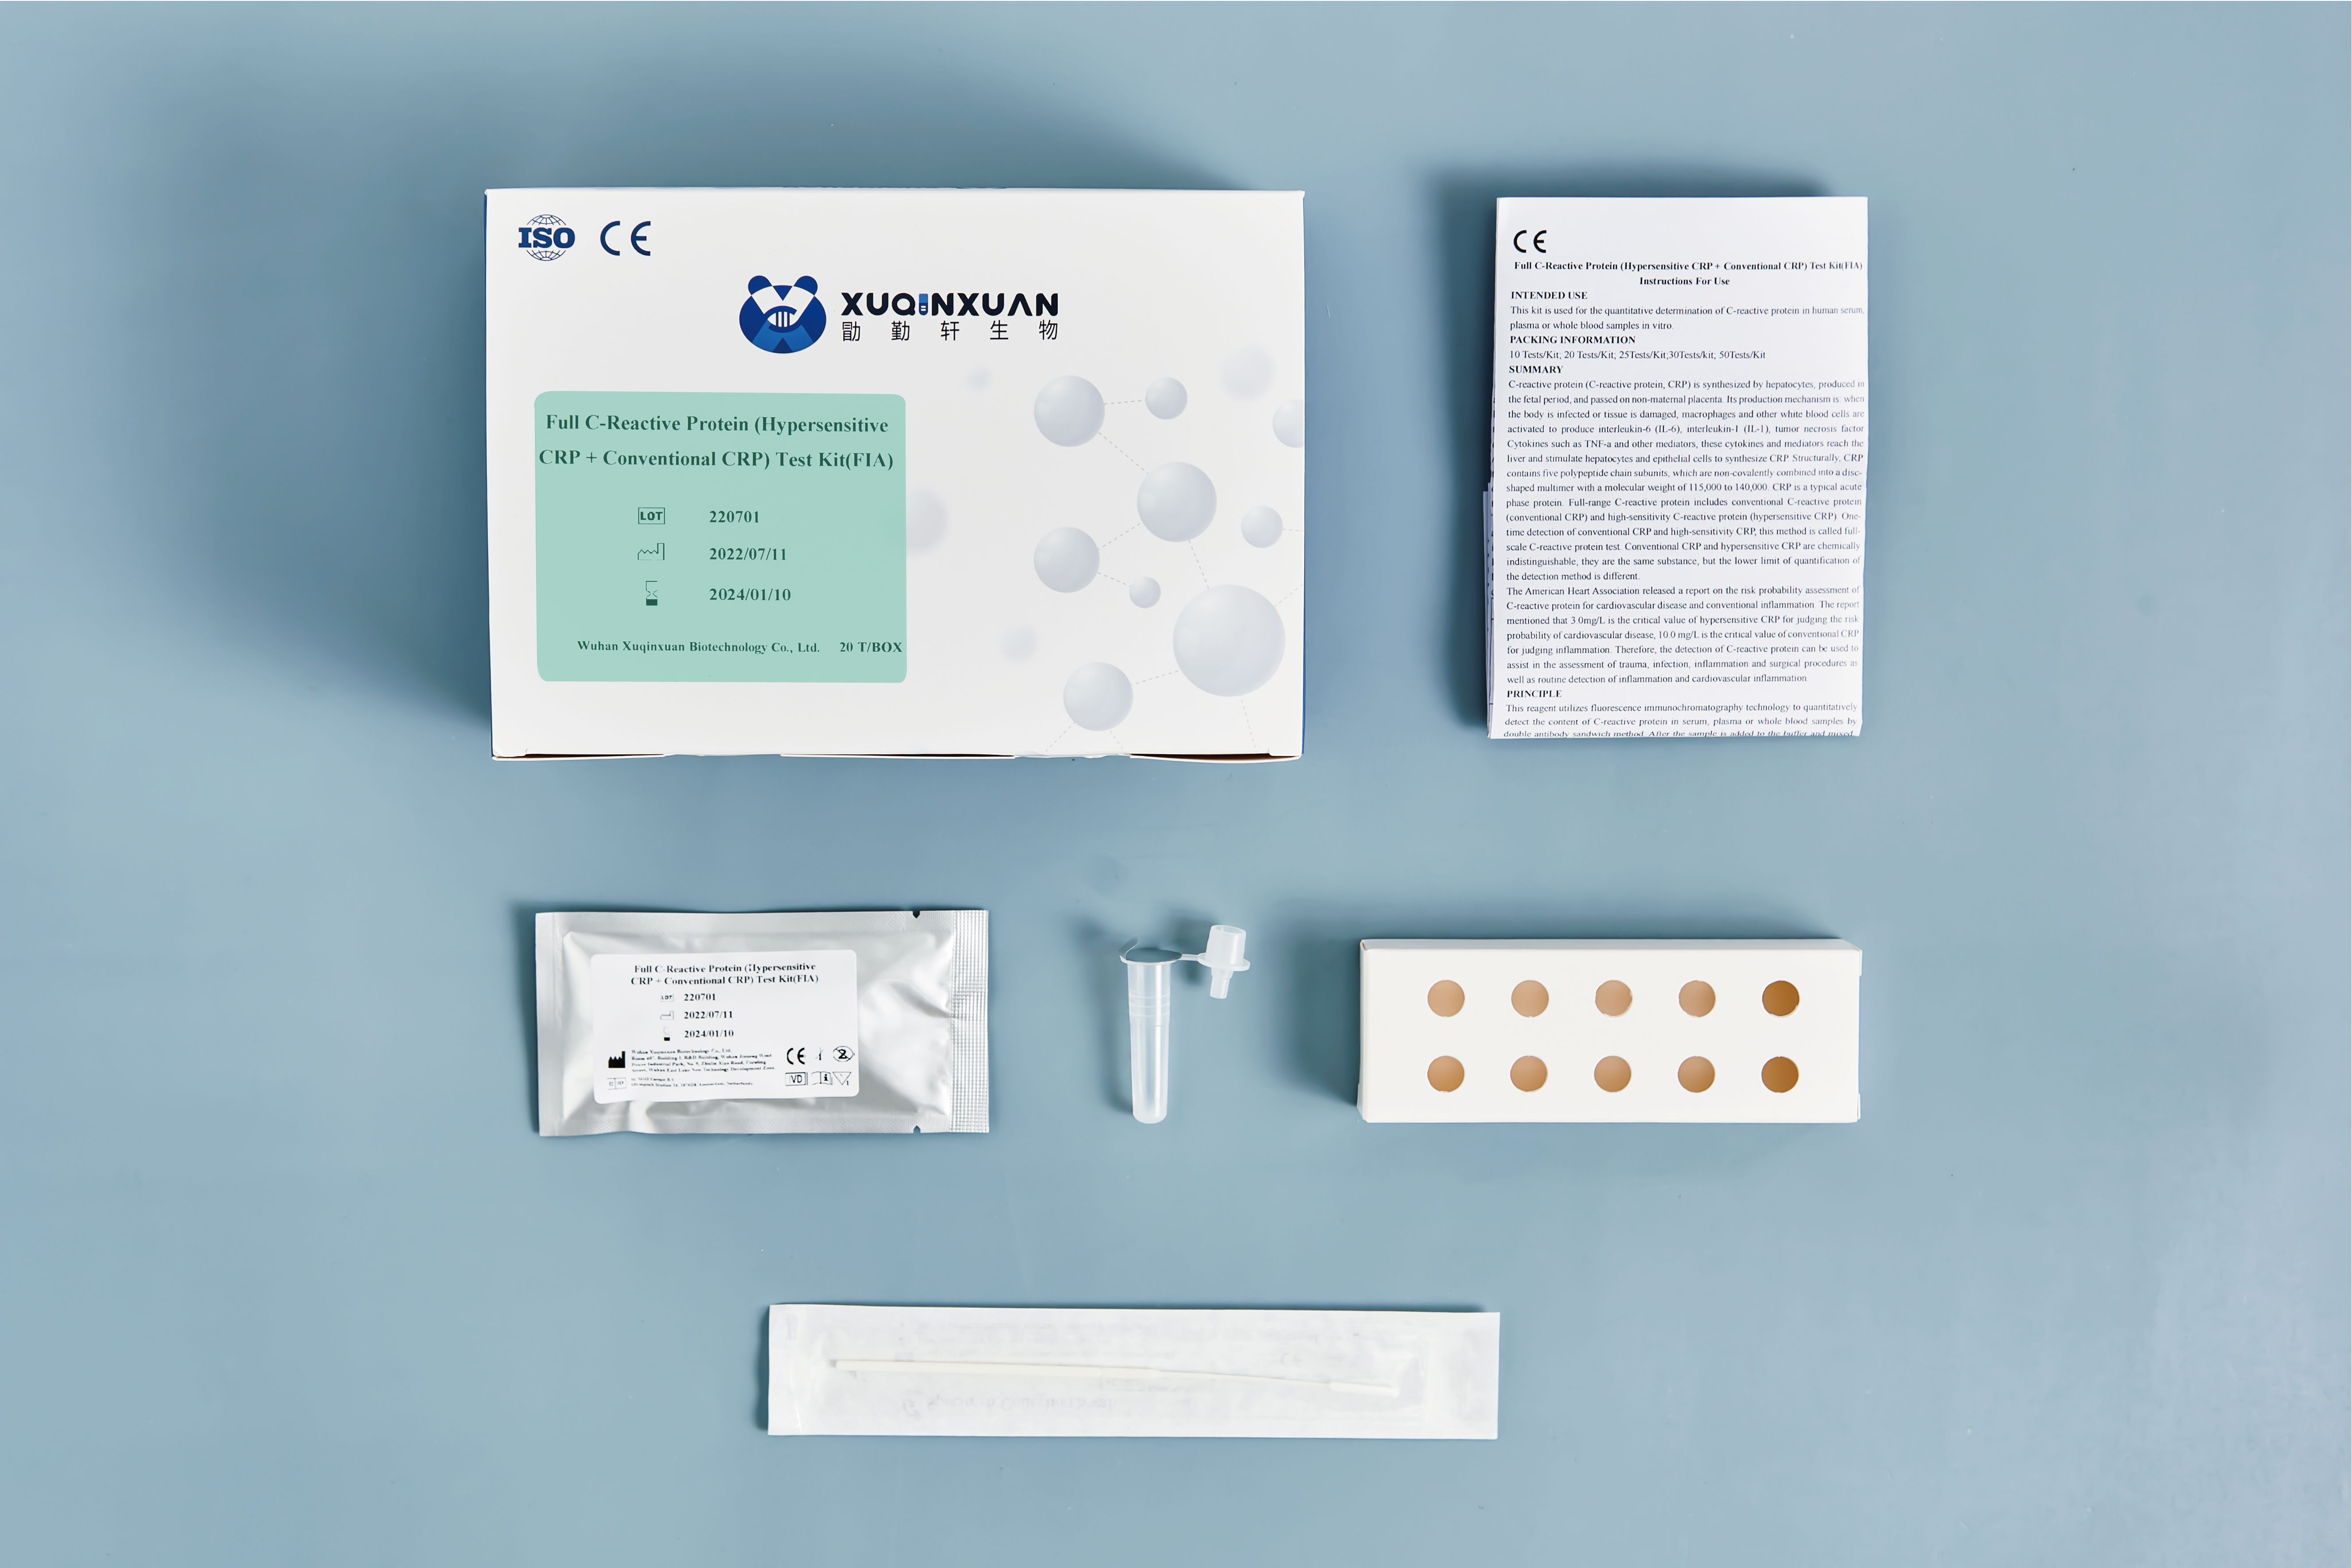 Full C-Reactive Protein (Hypersensitive CRP + Conventional CRP) Test Kit(FIA) 